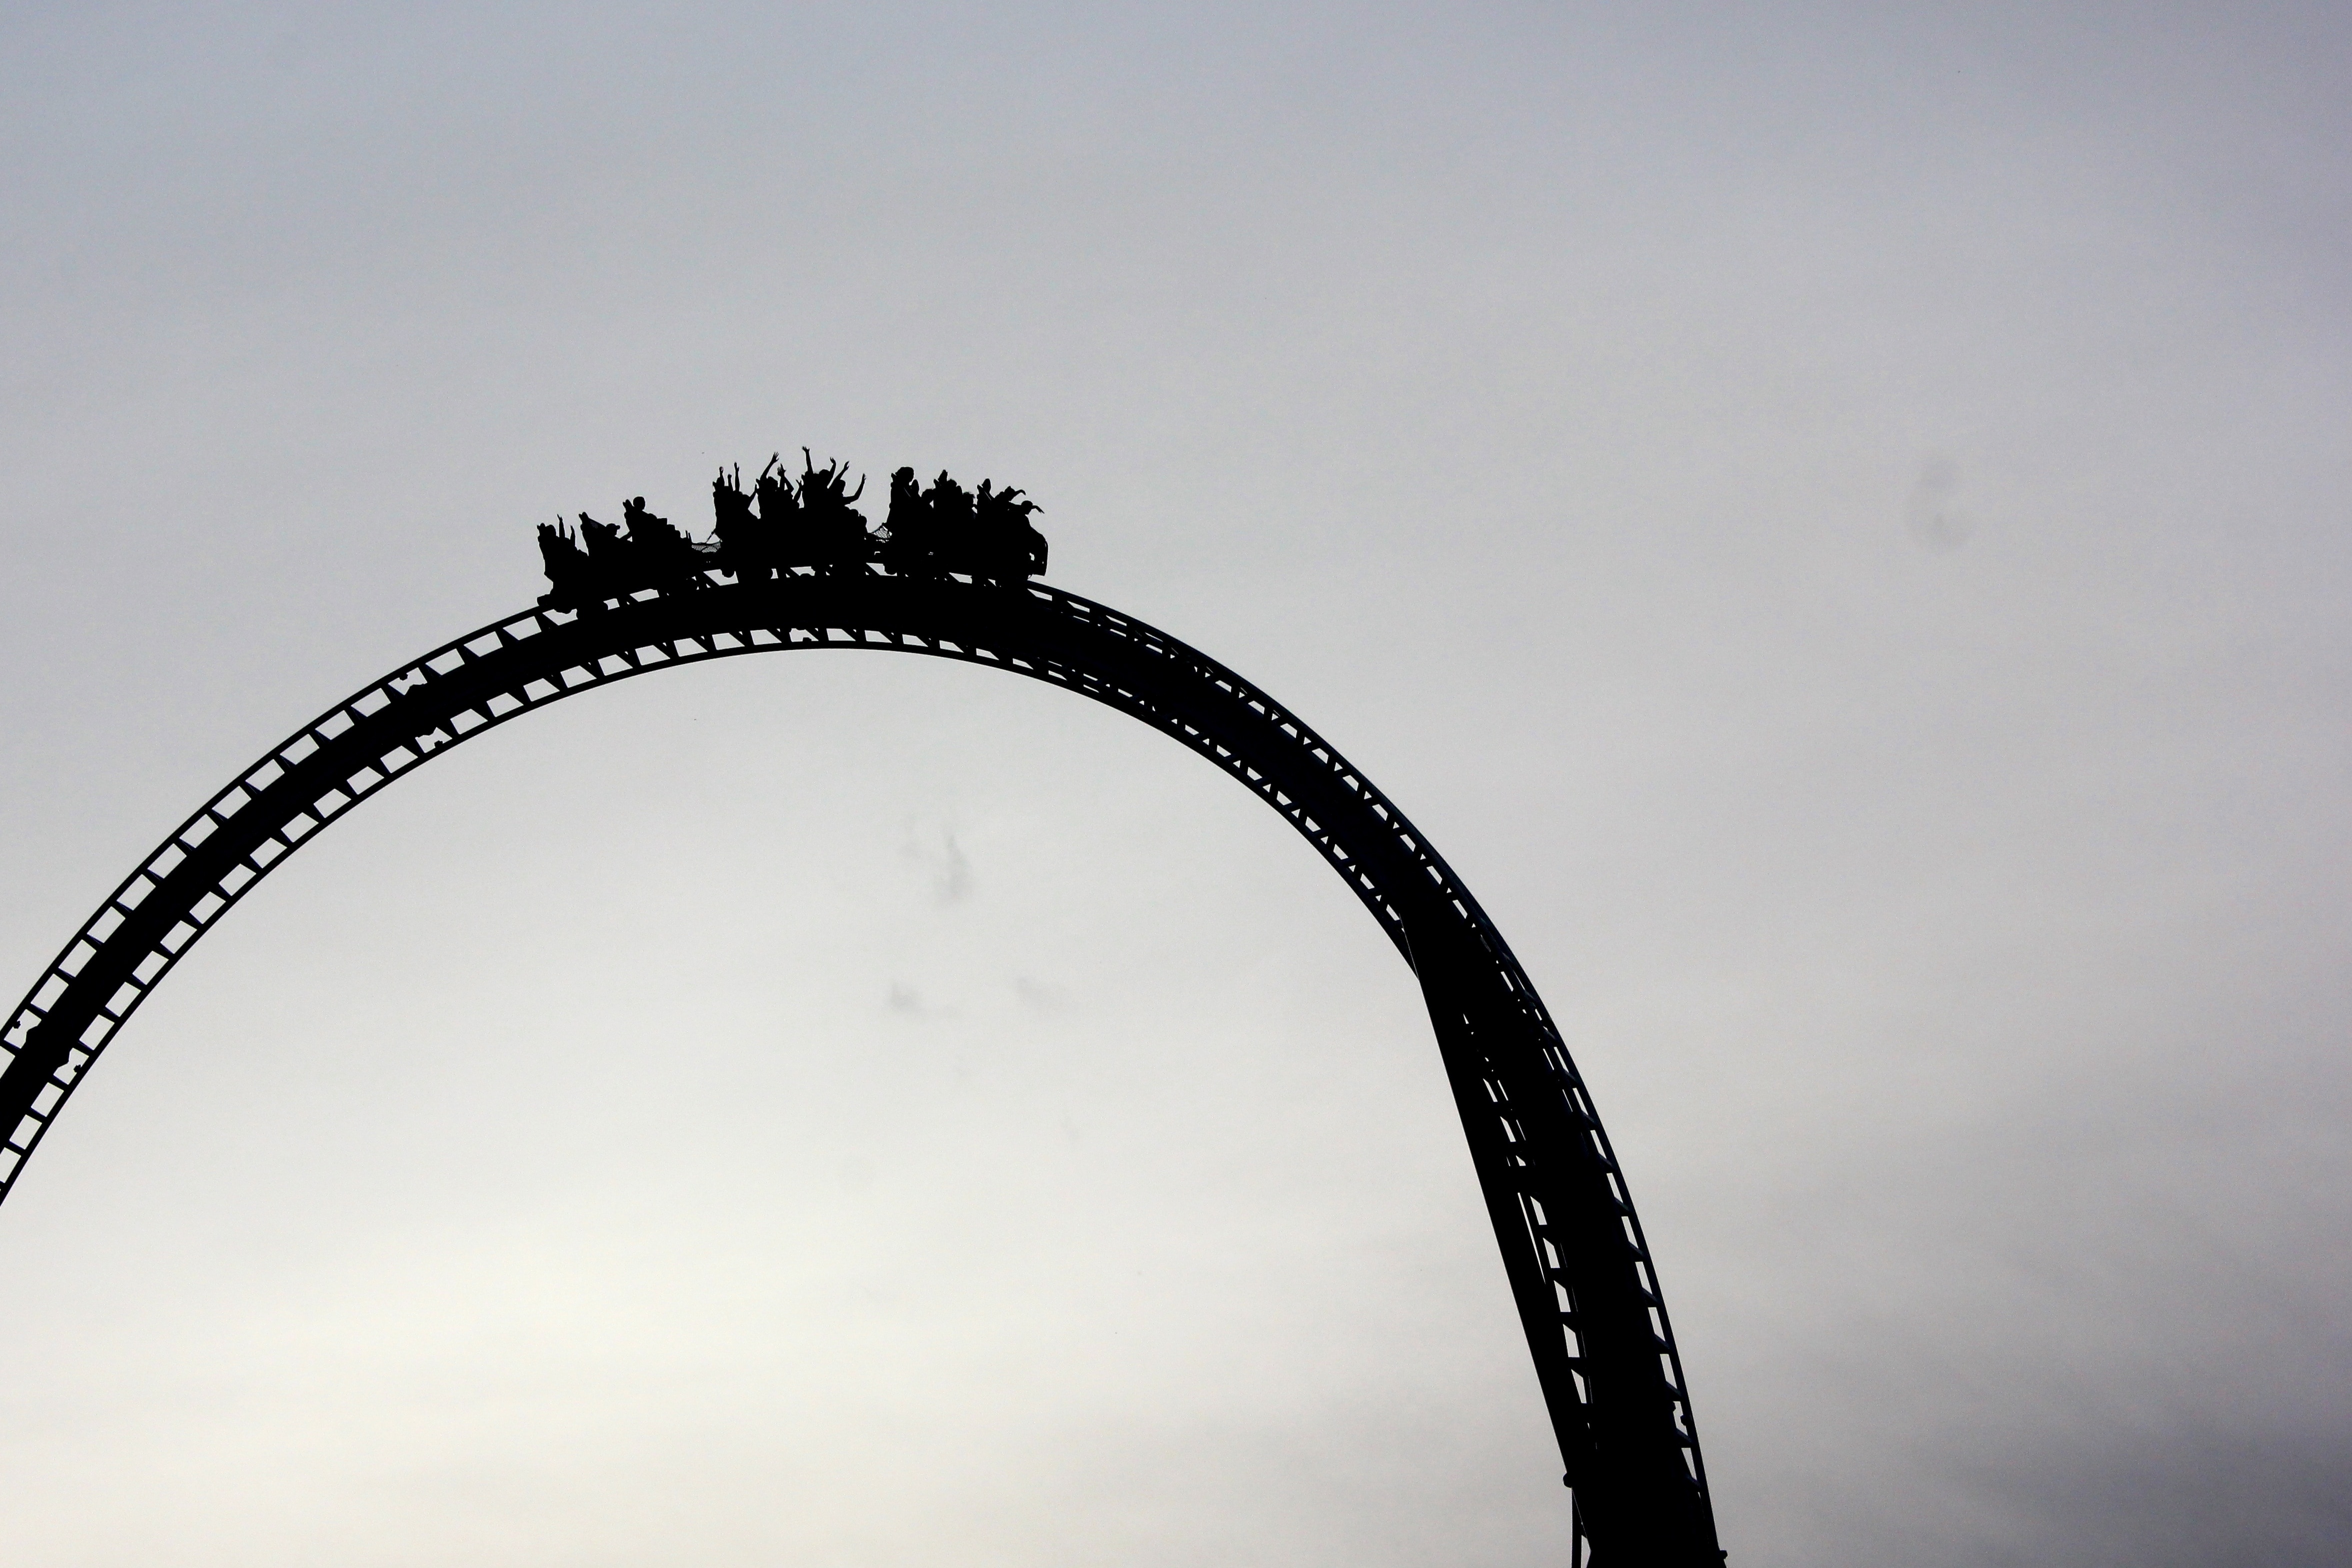 silhouette of people on roller coaster